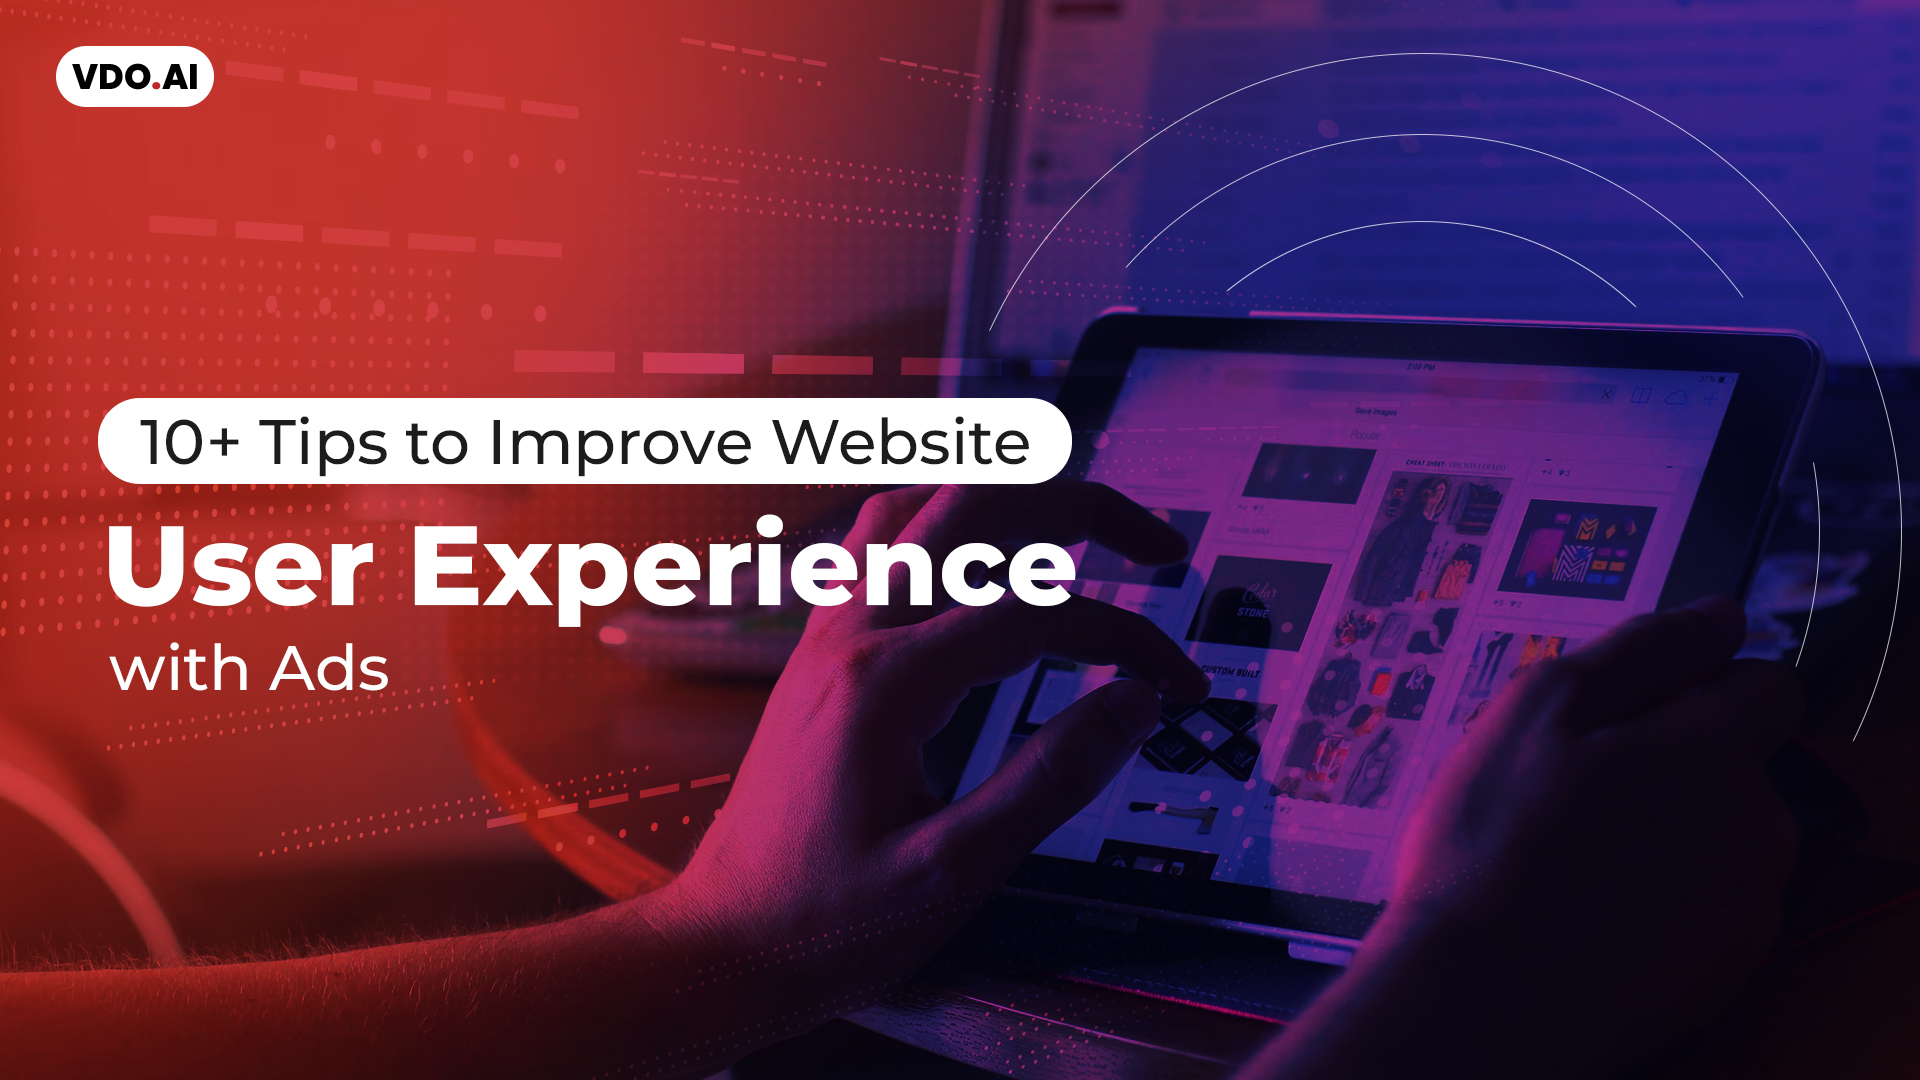 Improve User Experience with Ads